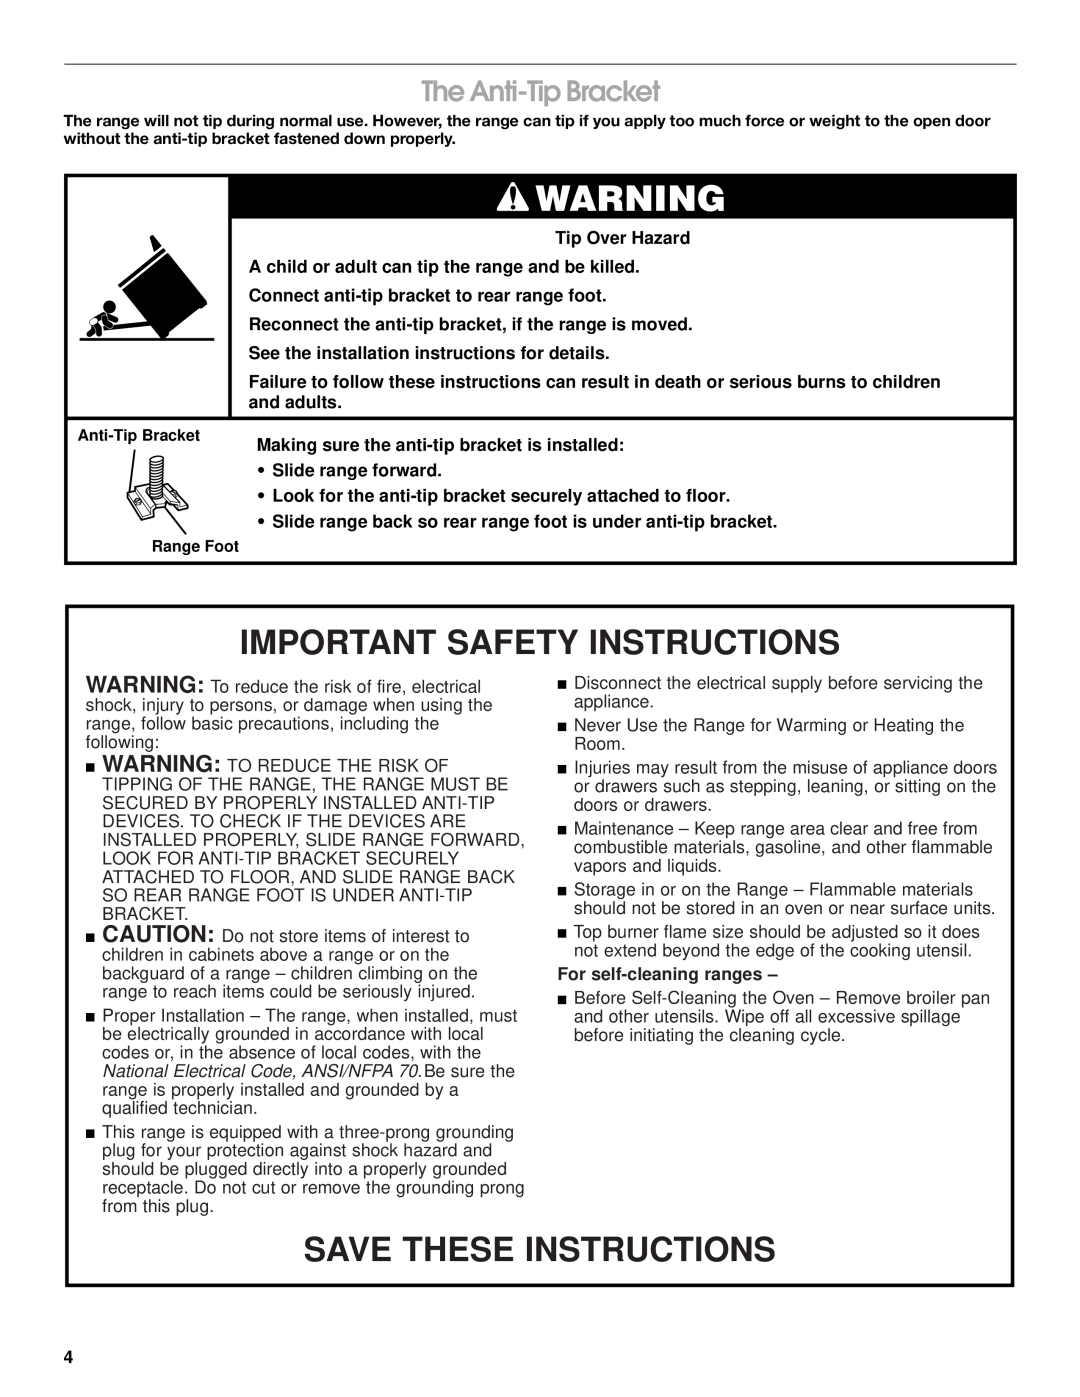 Whirlpool 8522407 The Anti-Tip Bracket, Important Safety Instructions, Save These Instructions, For self-cleaning ranges 